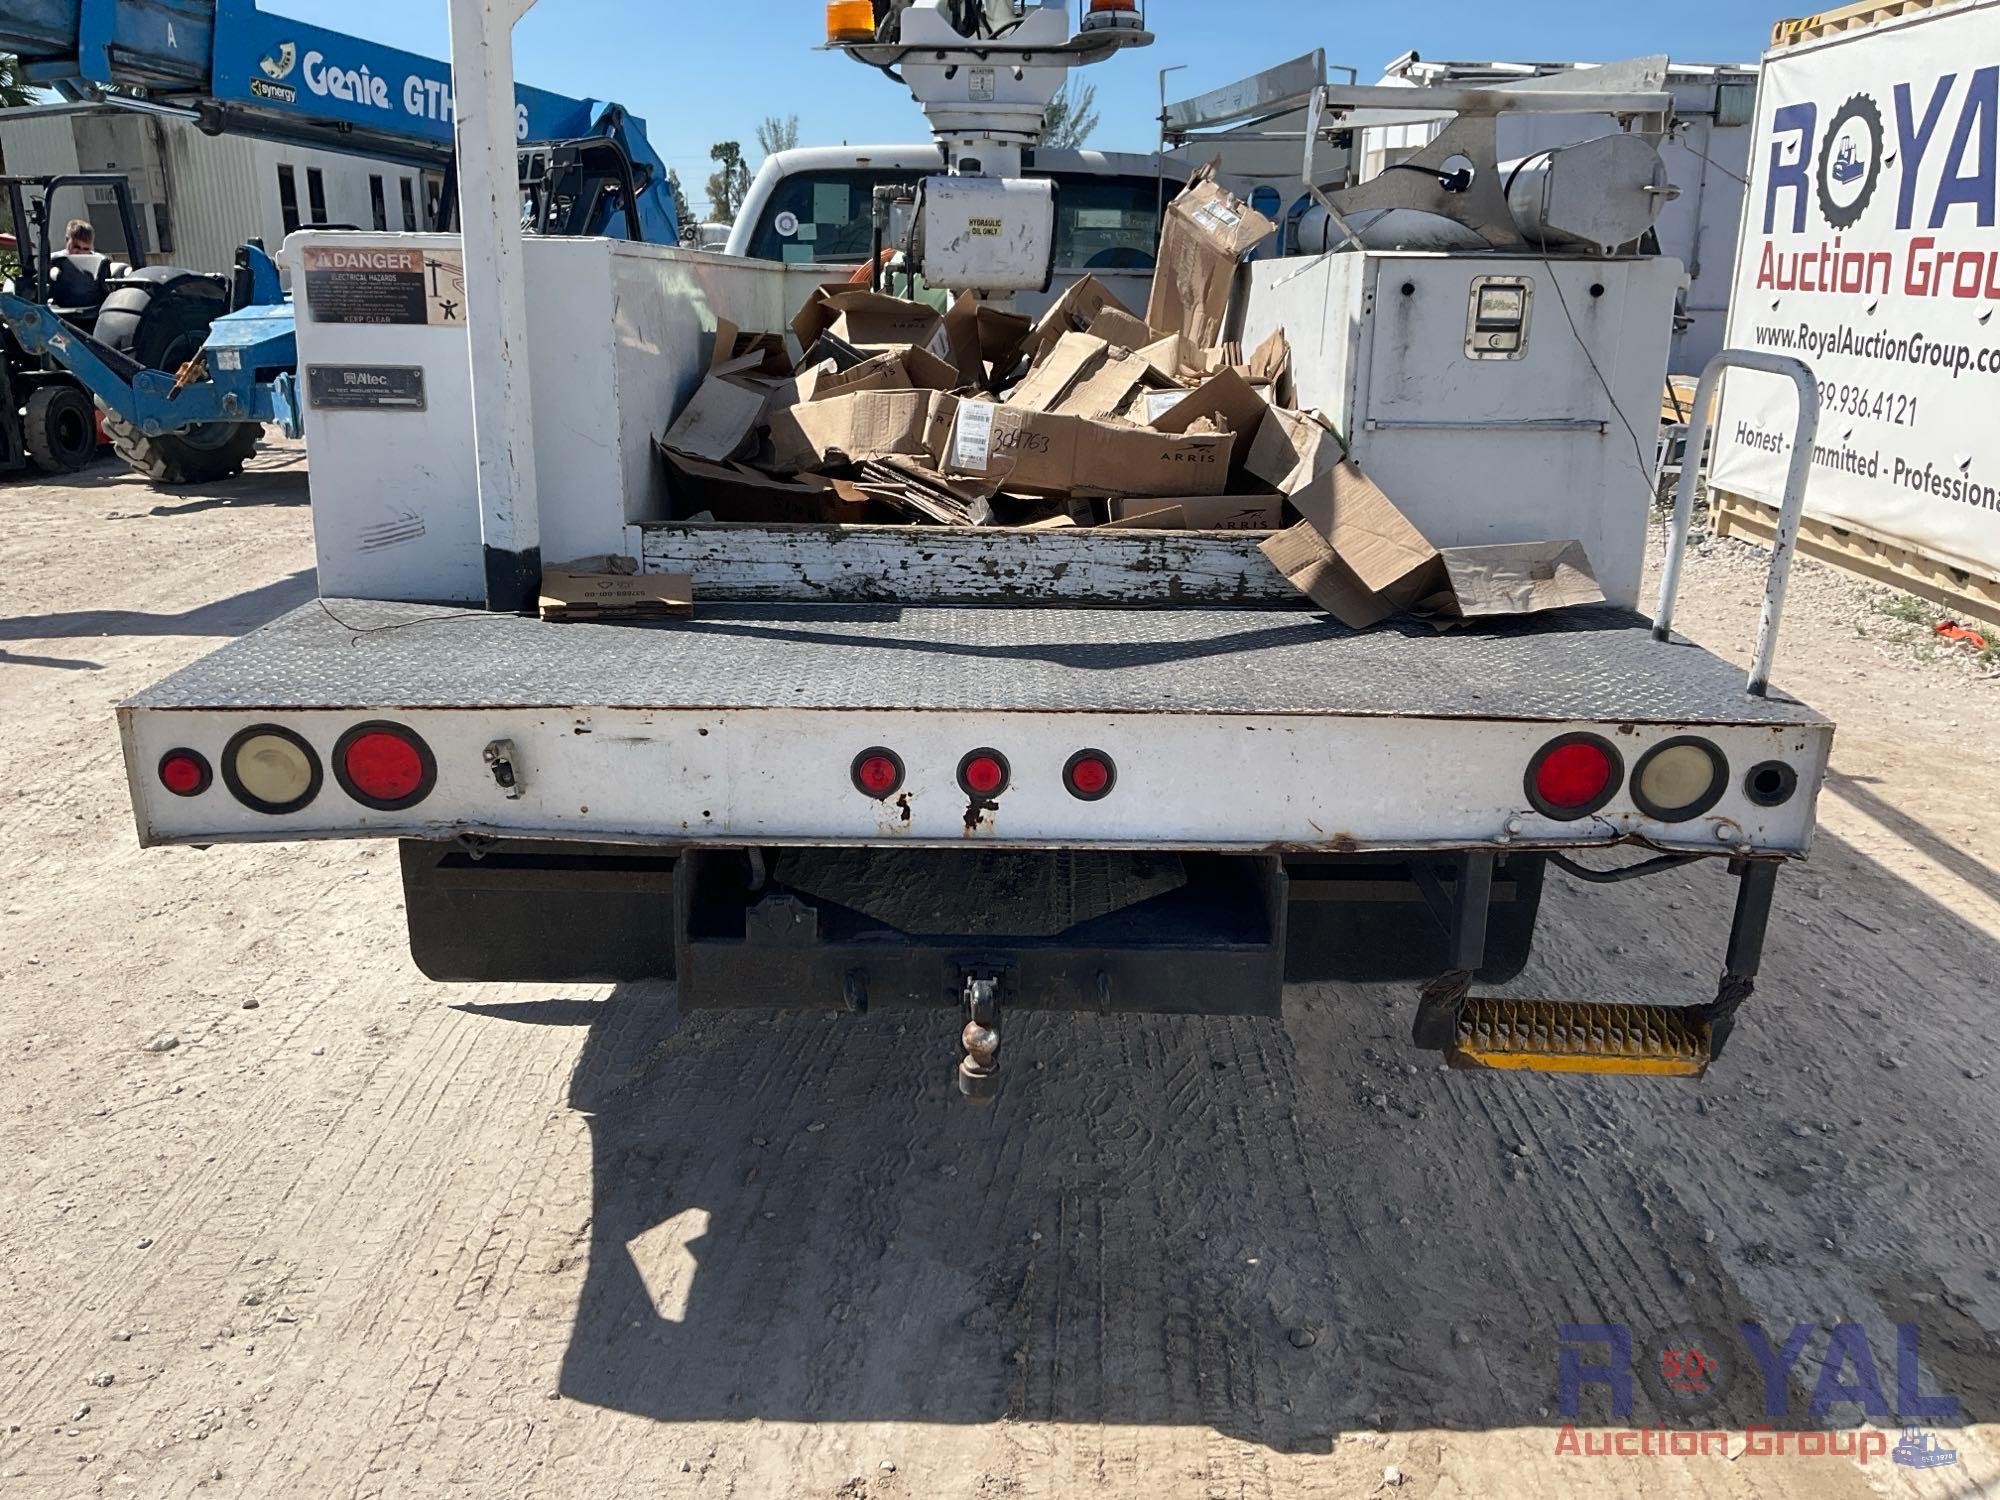 2006 Ford F350 Altec AT200A Bucket Truck